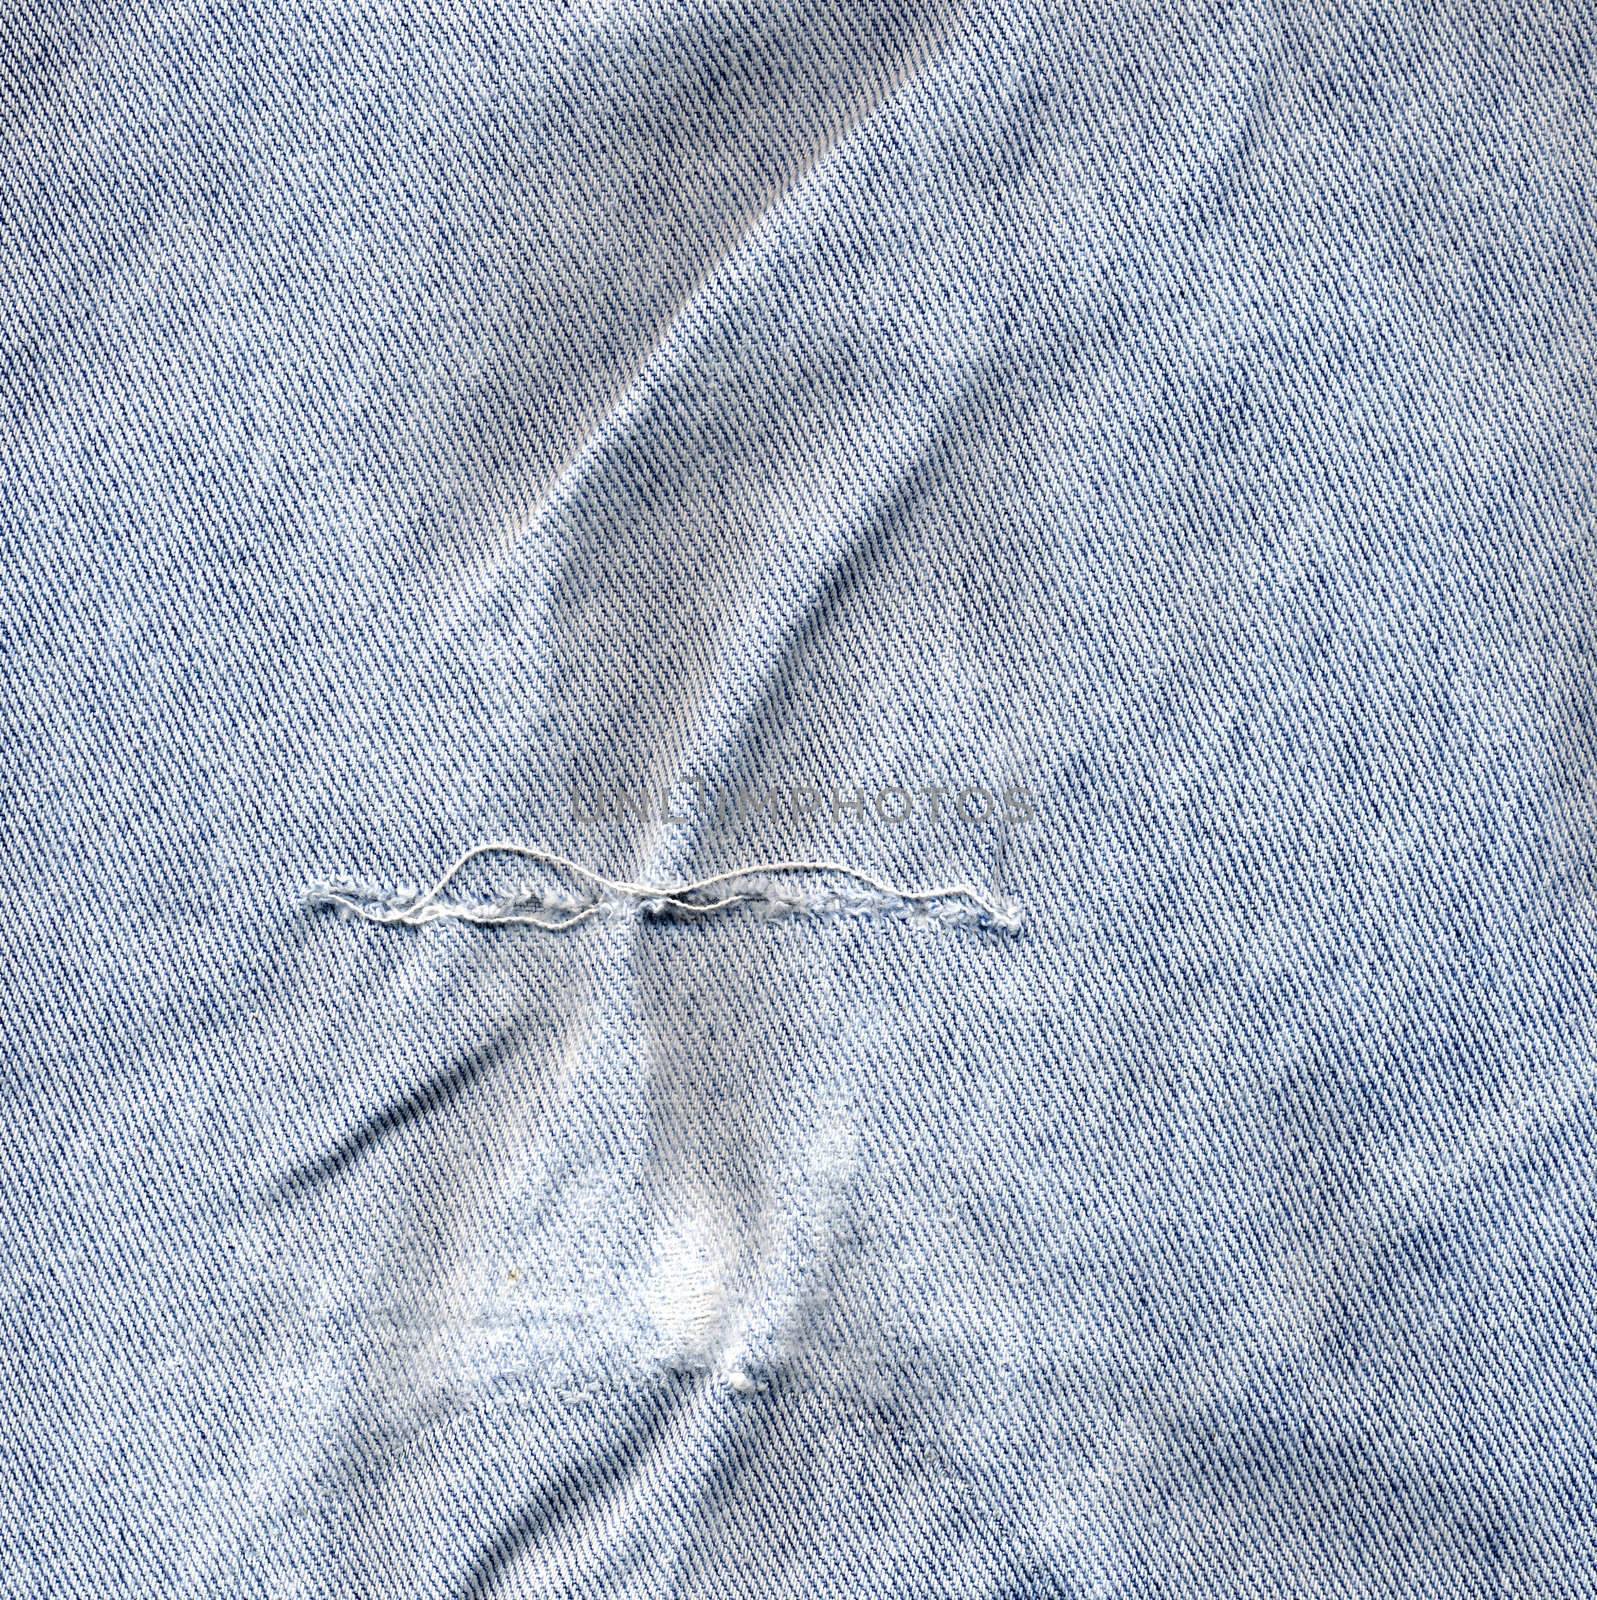 original American Blue Jeans by paolo77